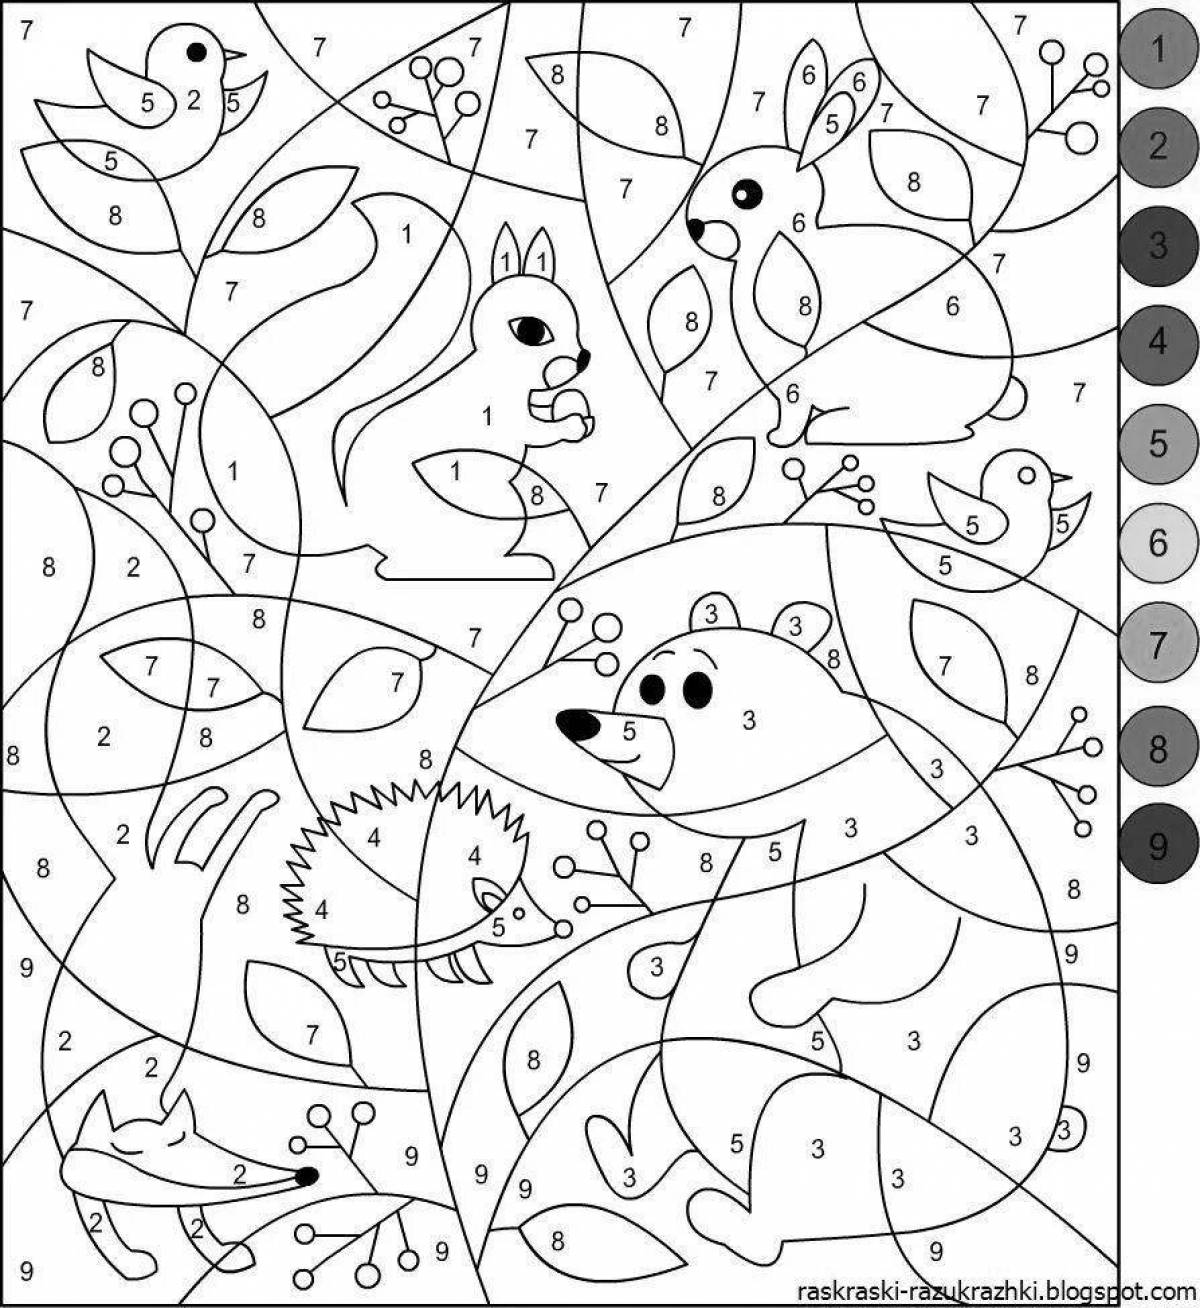 Joyful coloring for children 7-9 years old